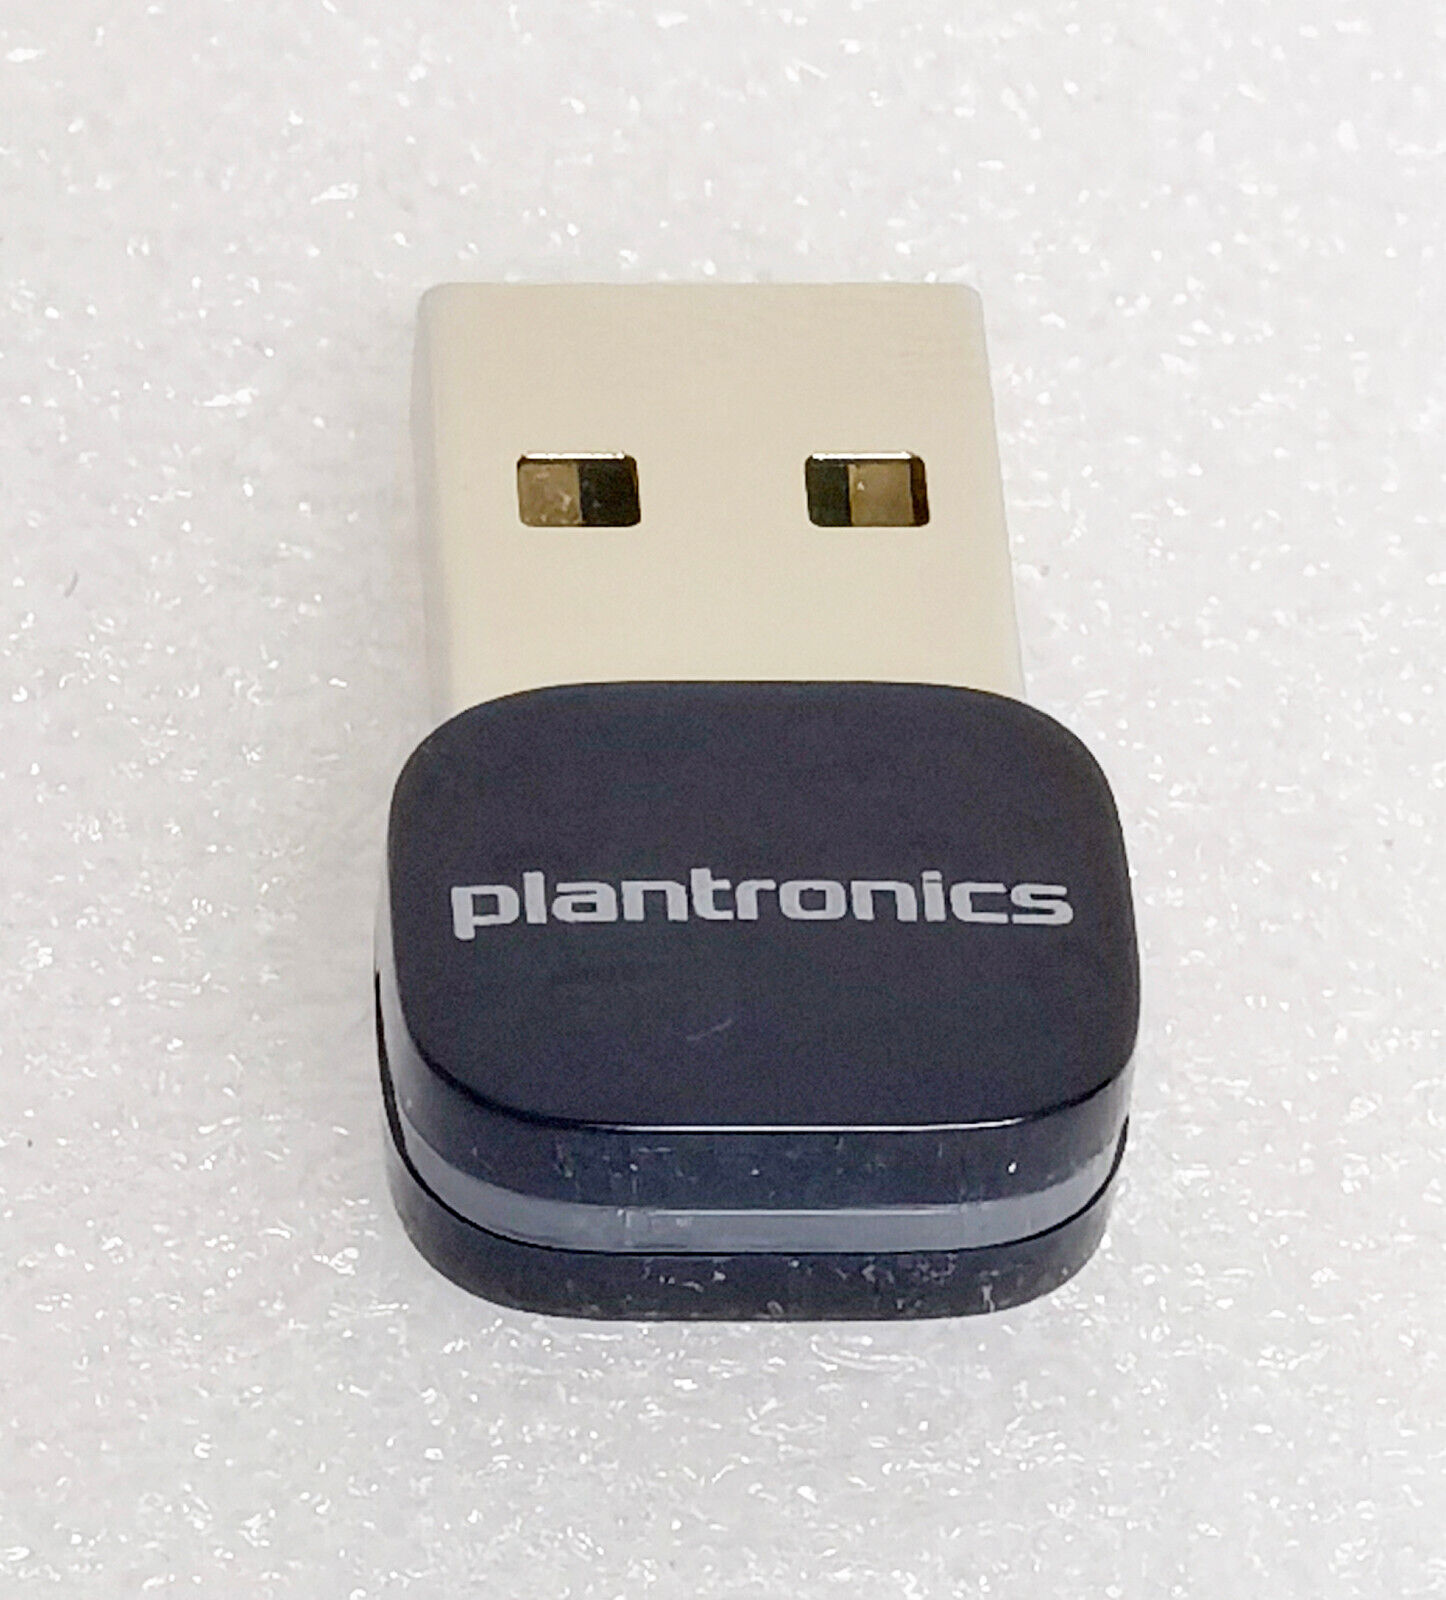 Plantronics BT300 Bluetooth USB Dongle Adapter for Voyager 5200 UC Legend UC